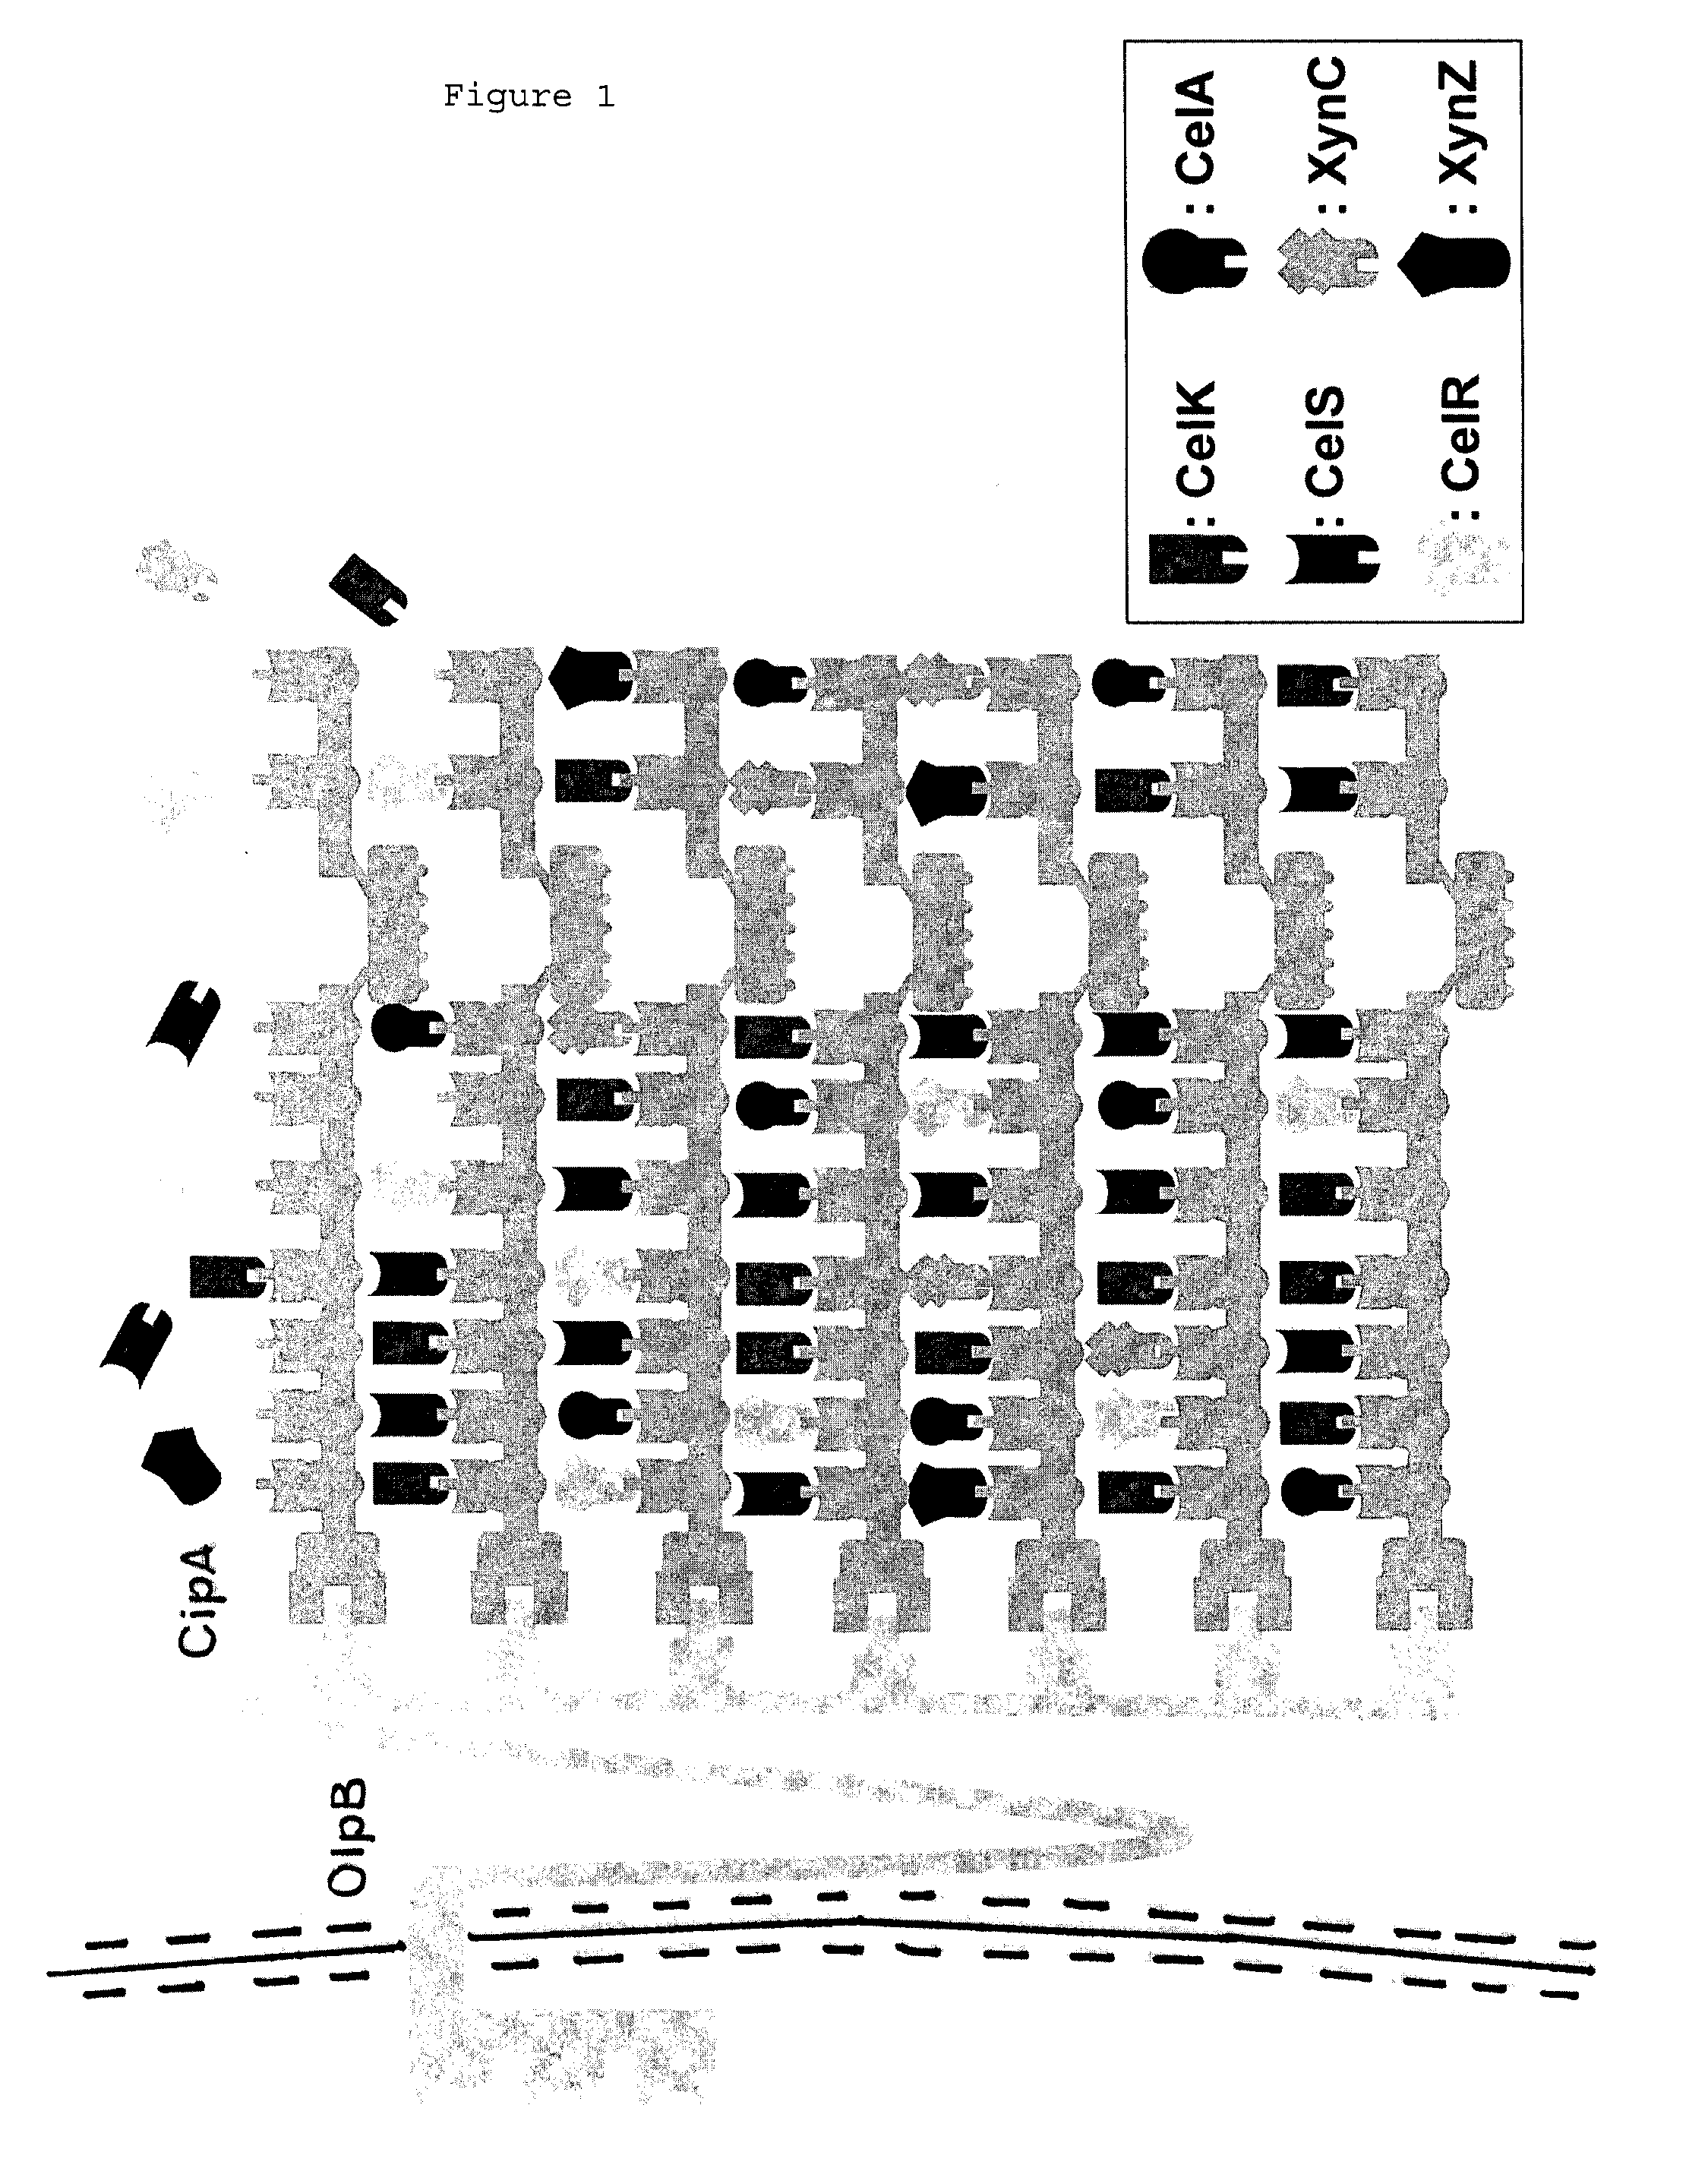 Method for producing extracellular multi-enzyme complexes in host cells